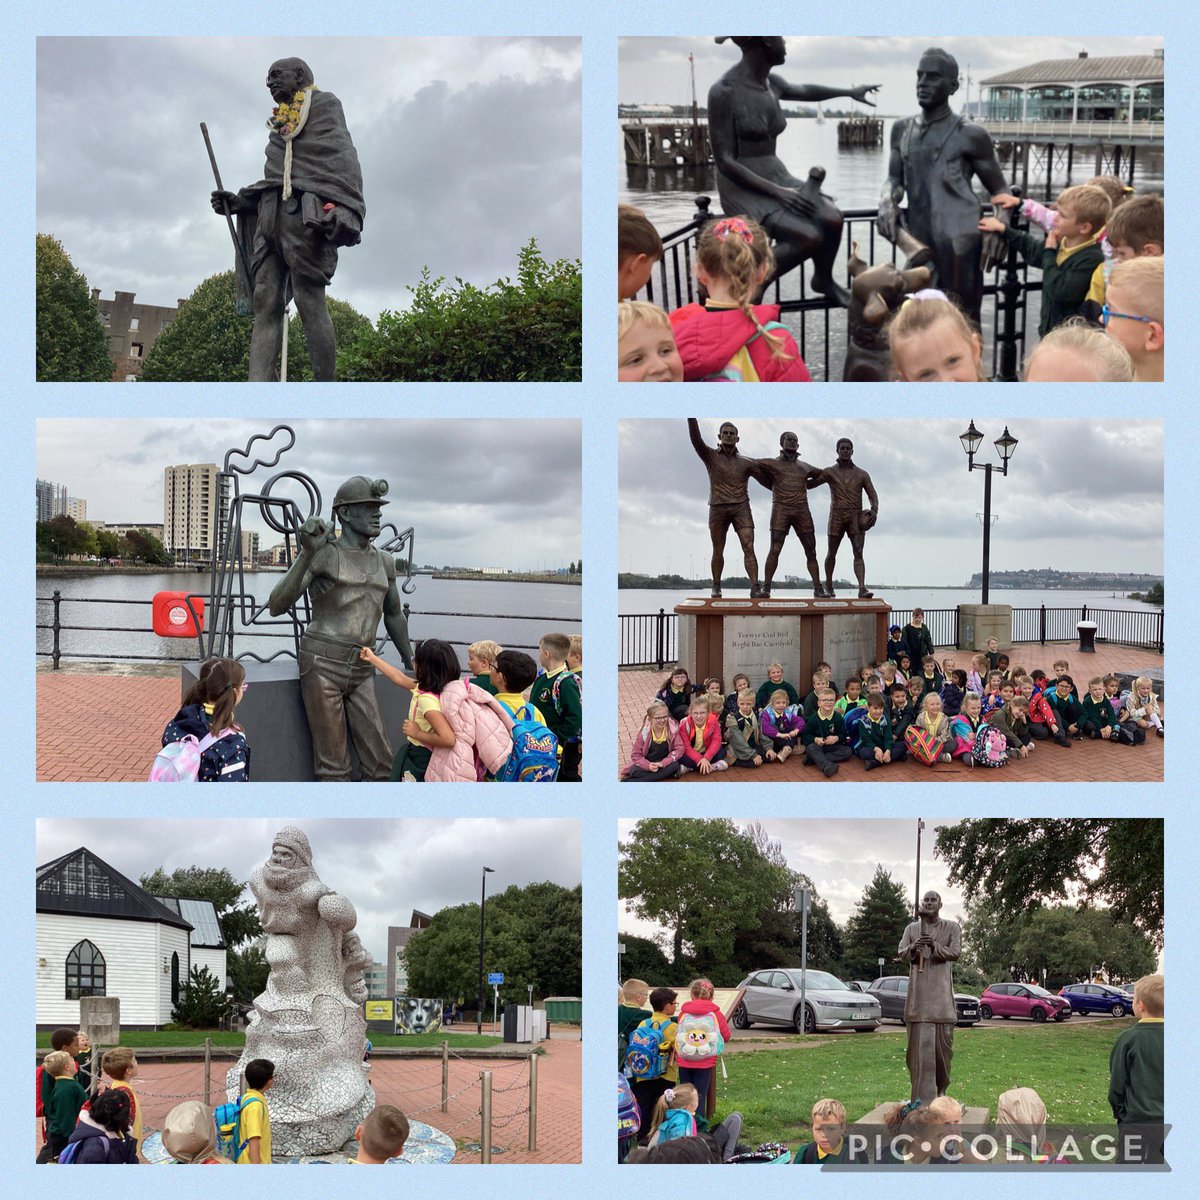 #Oren #Gwrydd have had a fantastic day at Cardiff Bay hunting for statues! We began out morning with the lovely children at @MSPSCardiff who taught us all about #Bettycampbell and #Blackhistorymonth We then explored the Bay and learnt about some significant people in Wales 🏴󠁧󠁢󠁷󠁬󠁳󠁿